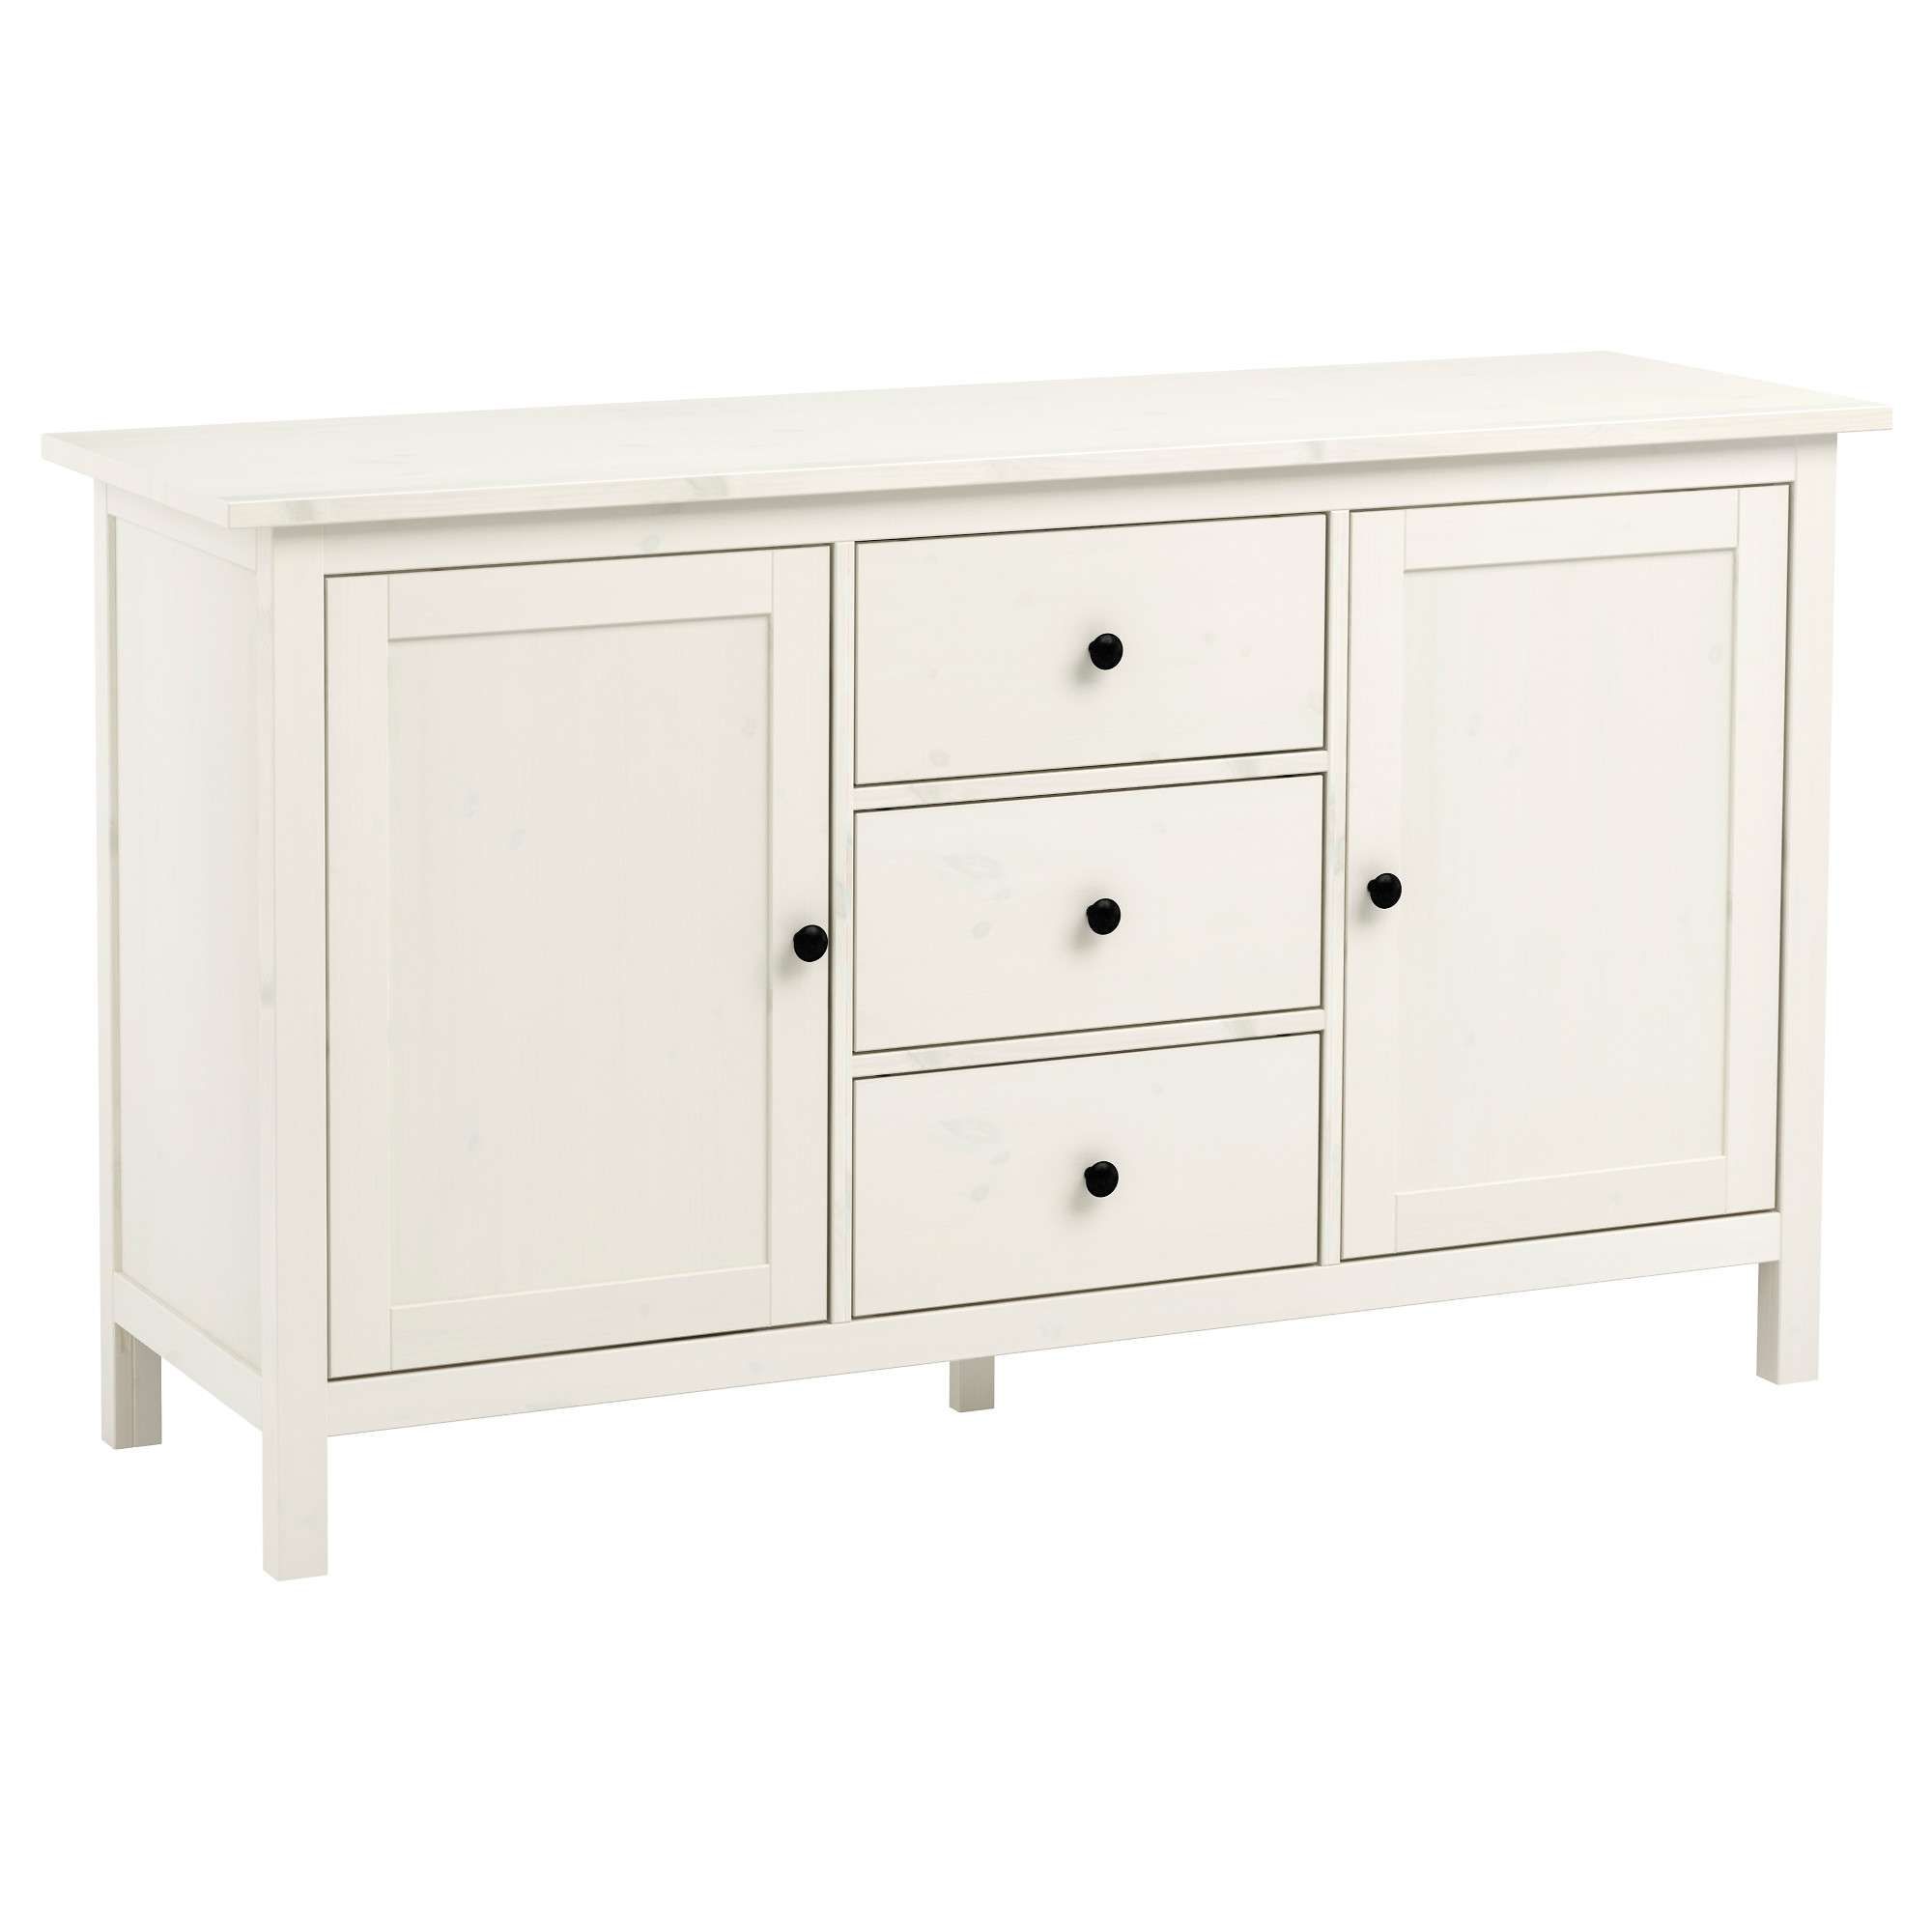 Hemnes Sideboard – White Stain – Ikea With Hallway Sideboards (View 6 of 20)